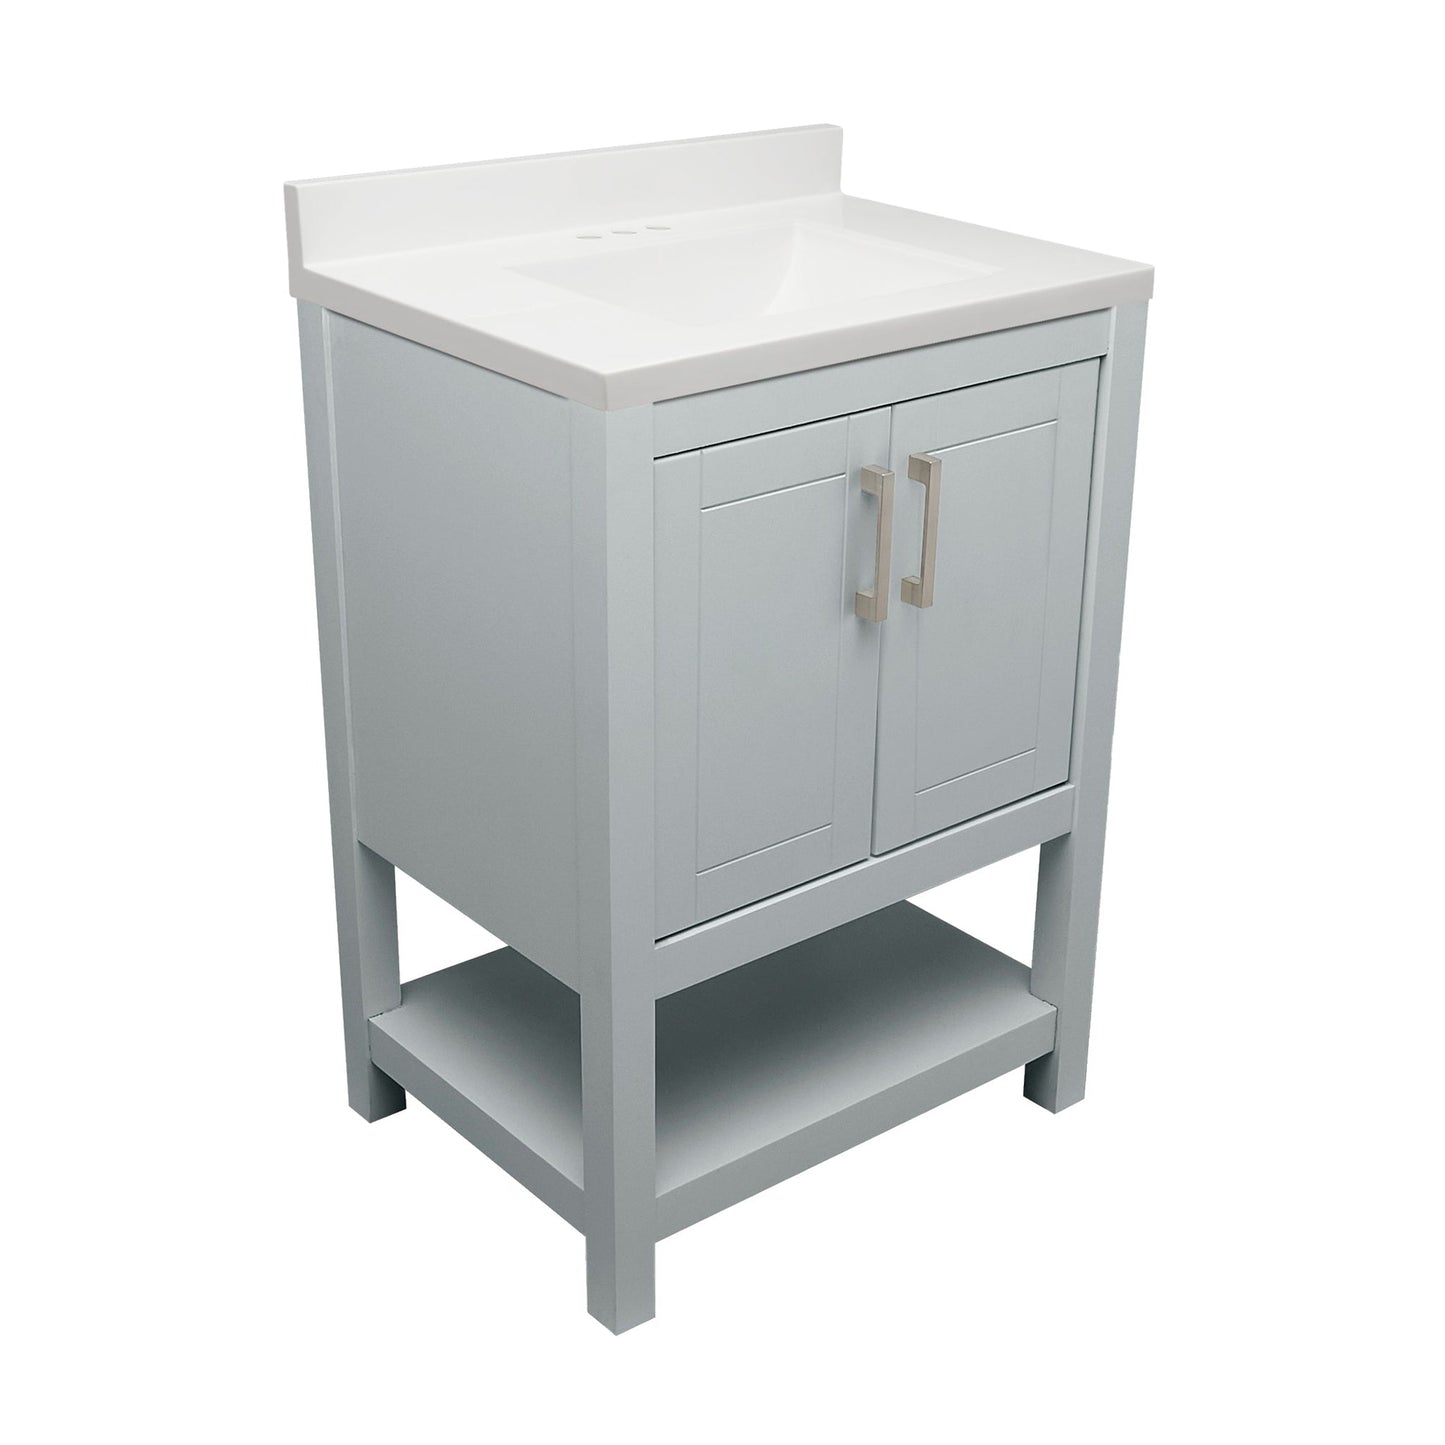 Ella's Bubbles Taos 25" Gray Bathroom Vanity With White Cultured Marble Top With White Backsplash and Sink